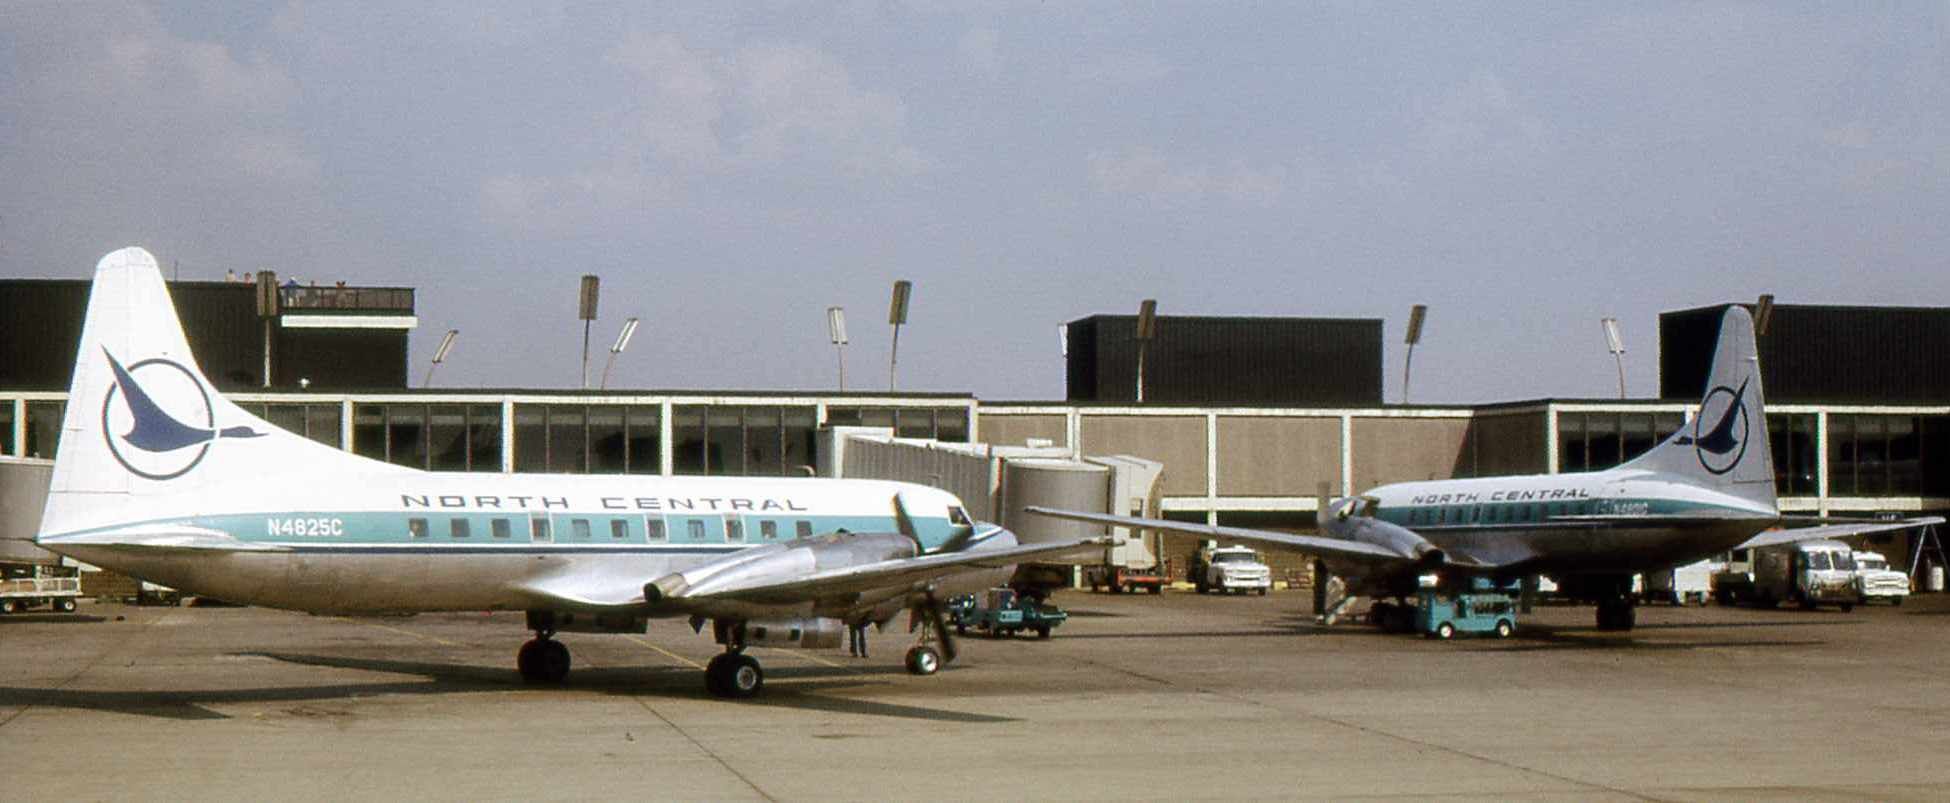 Two North Central Airlines CV-580 Aircraft at Chicago O'Hare International Airport